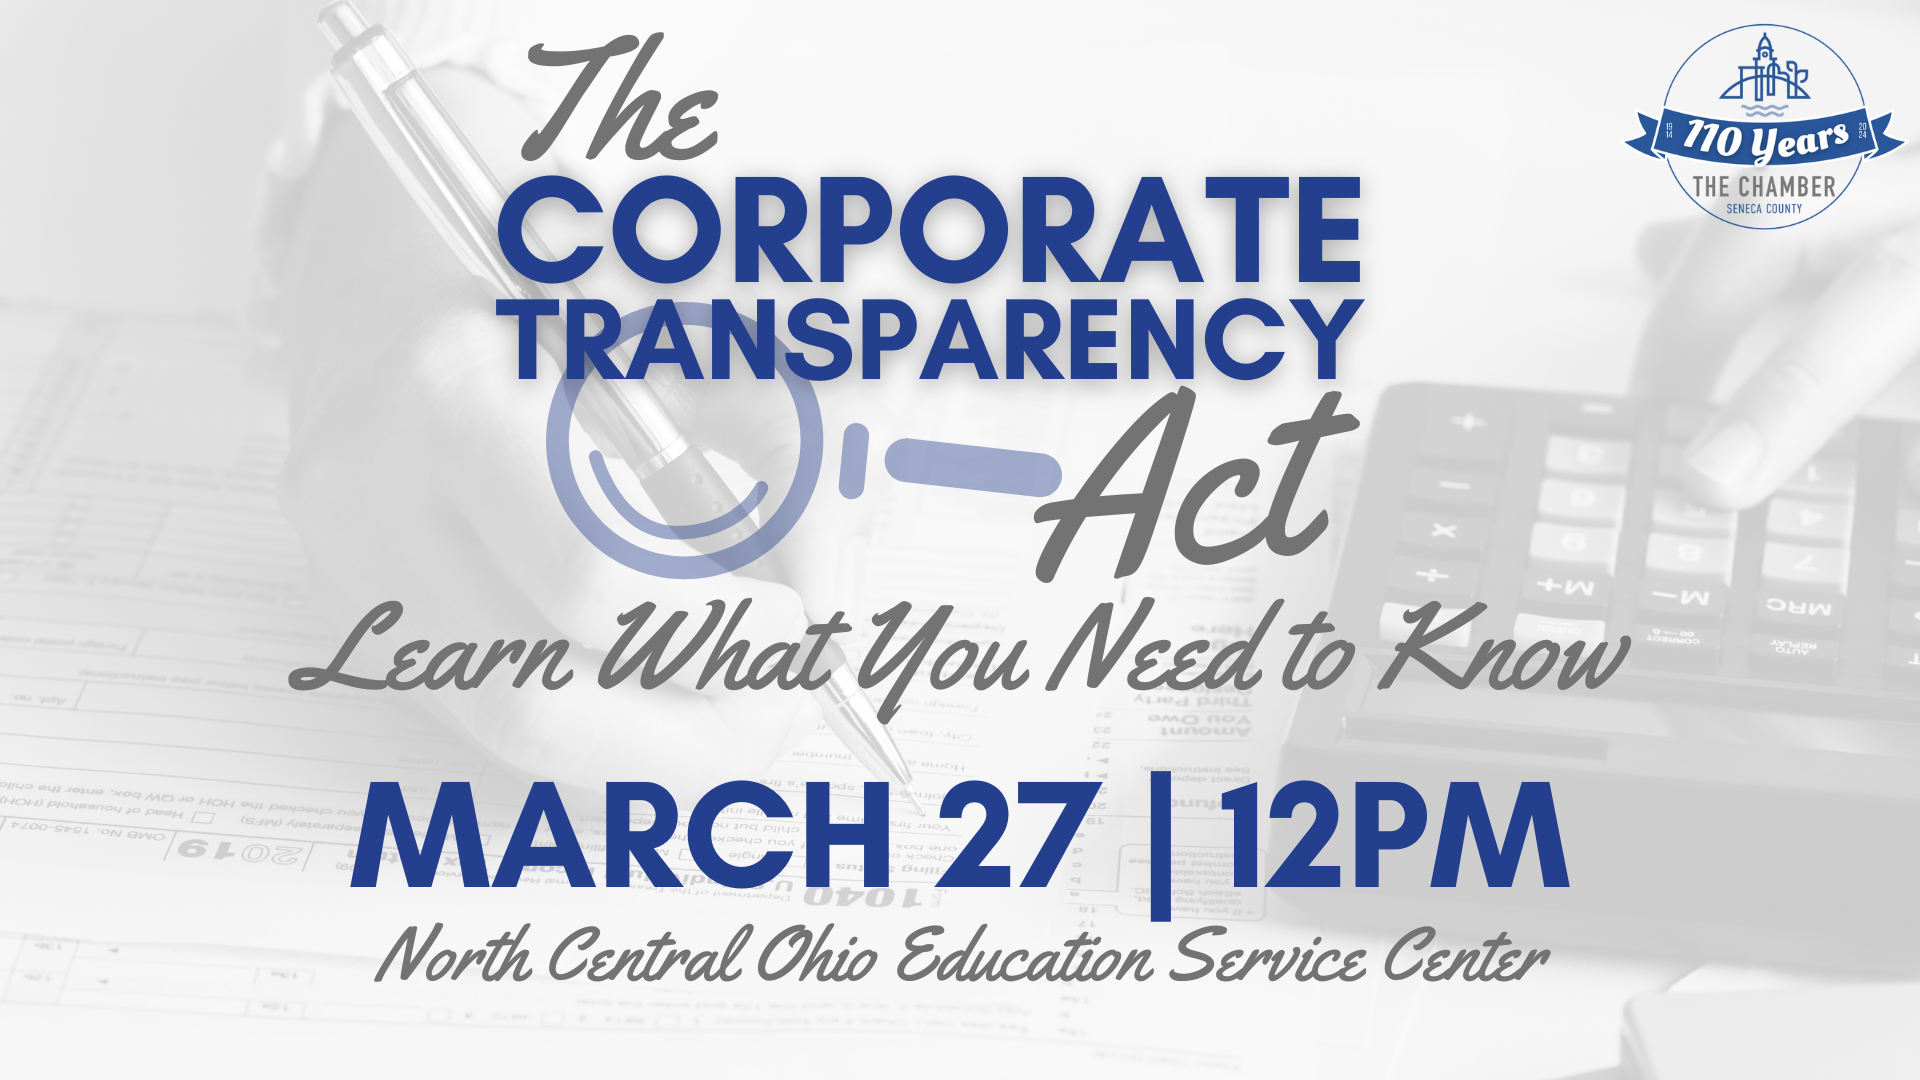 Corporate Transparency Act Compliance Workshop